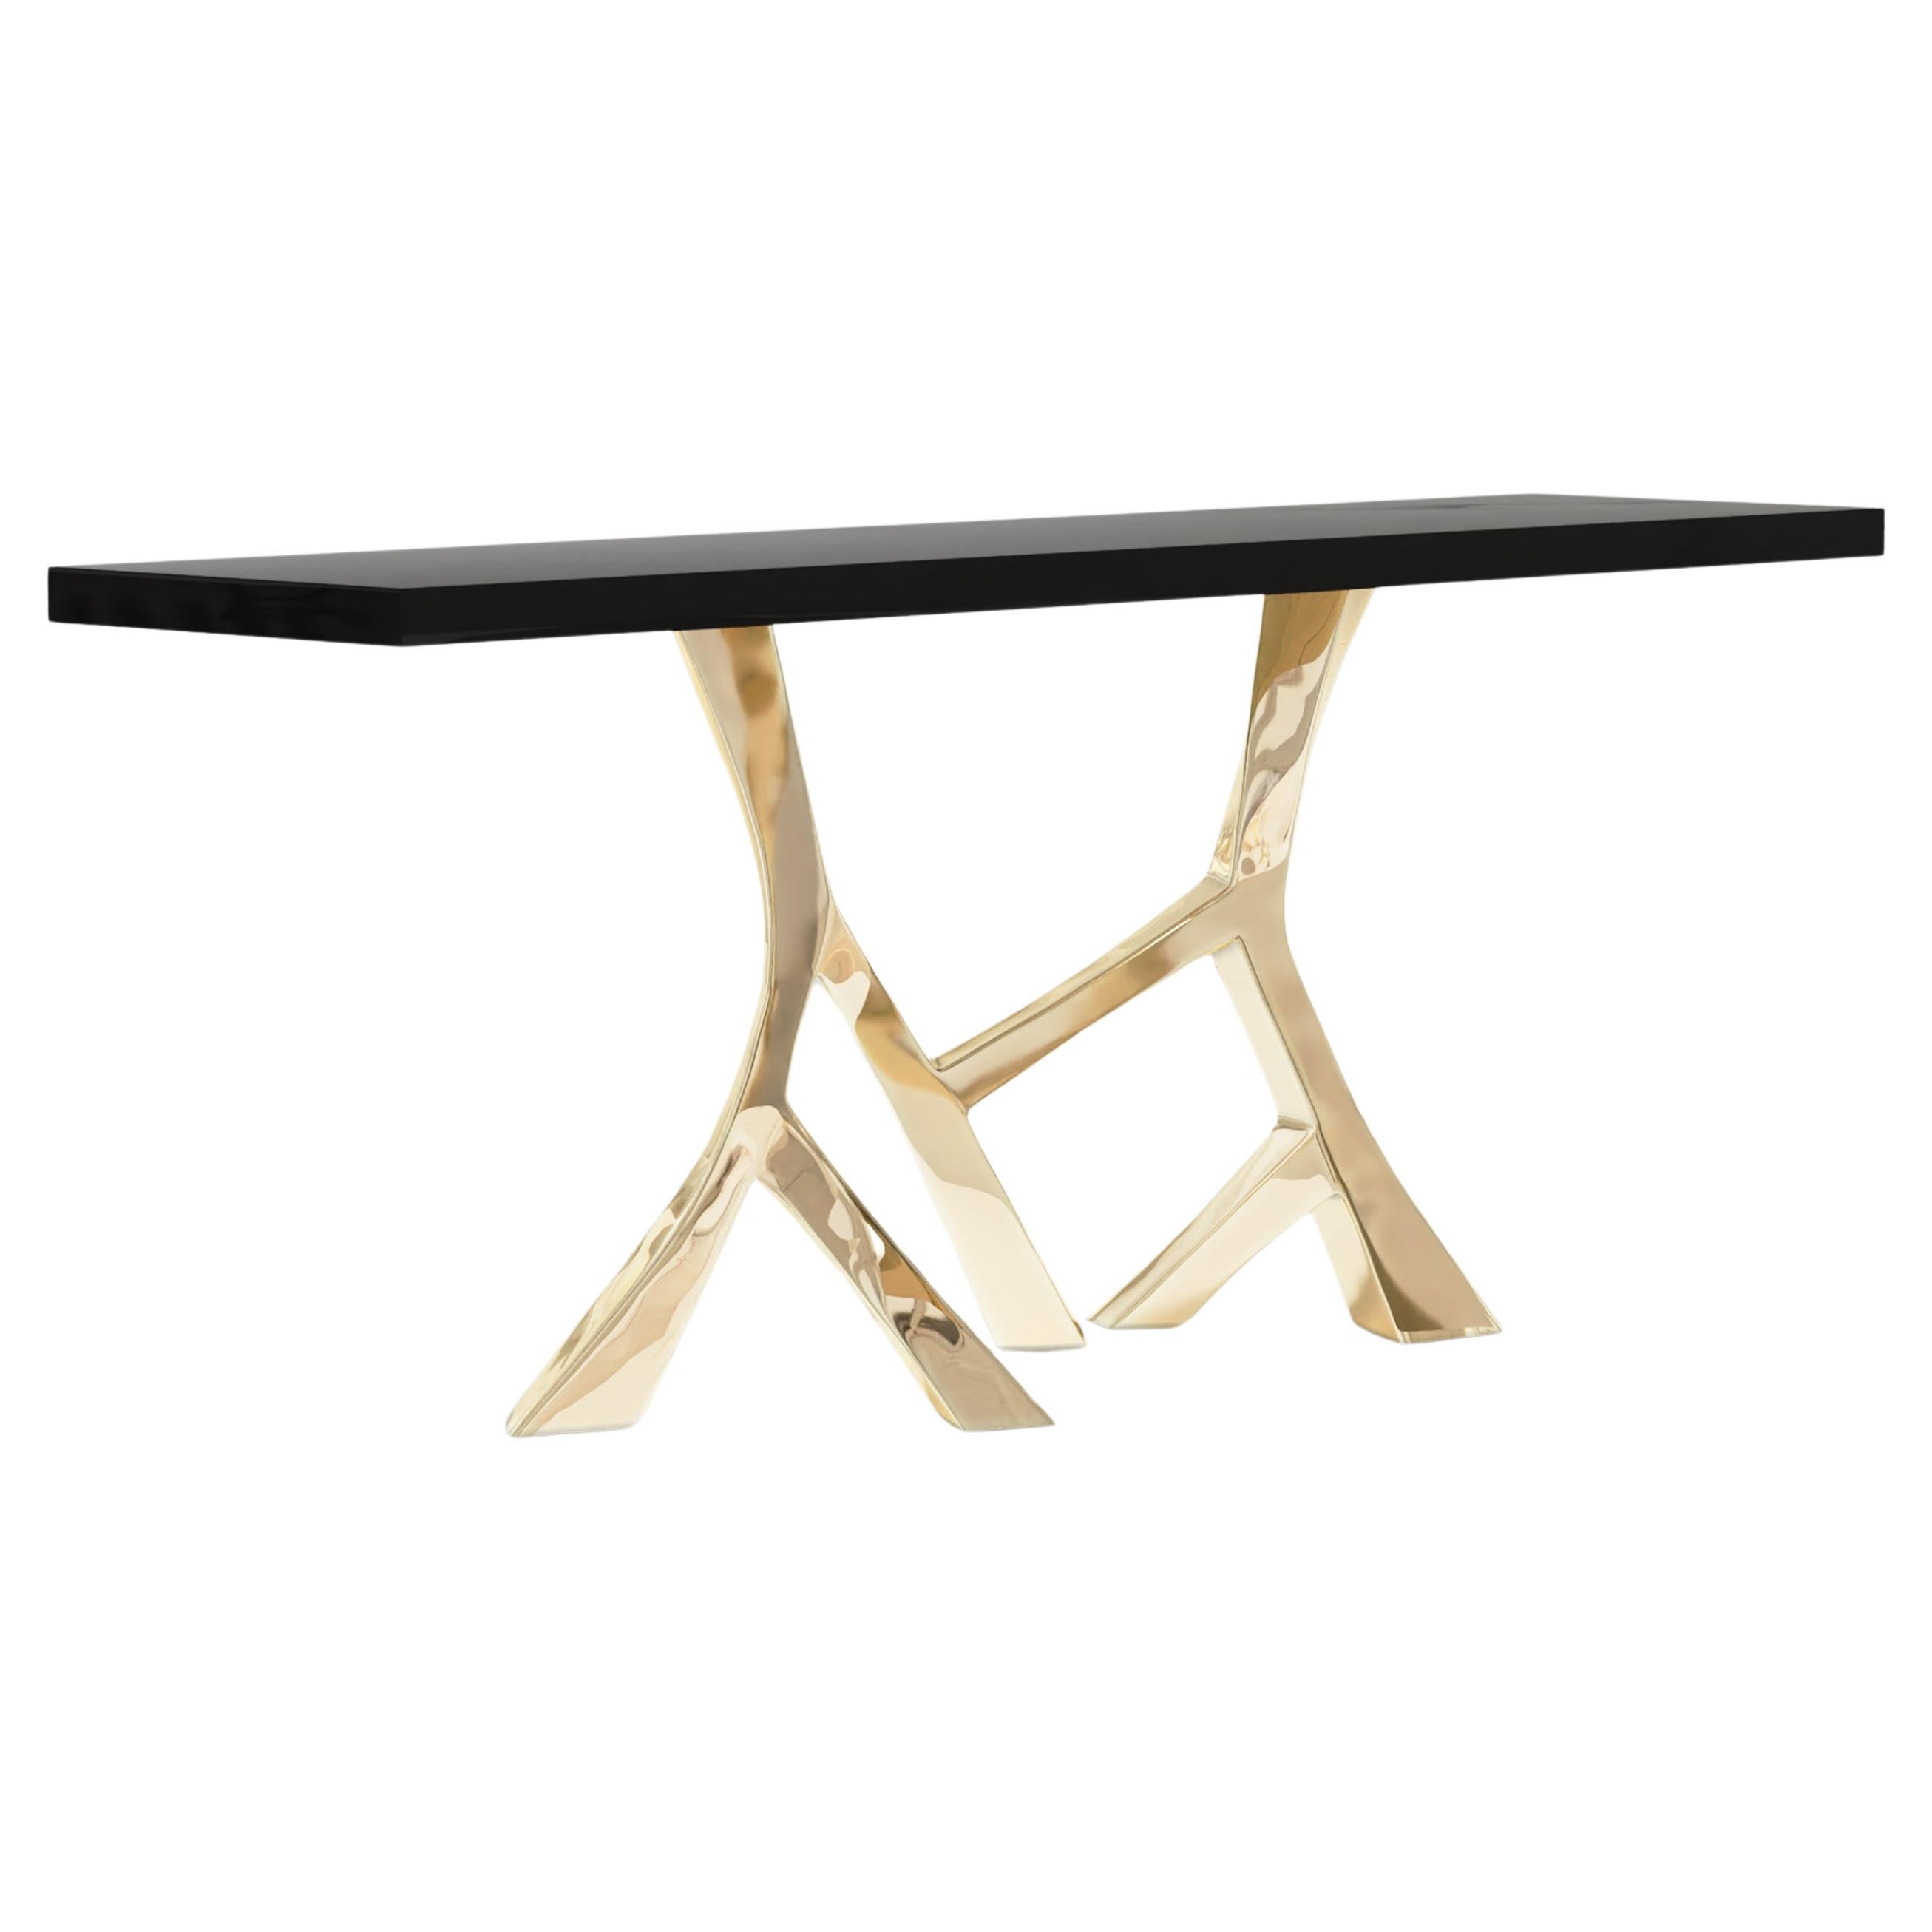 Vena Console Table in polished bronze and black lacquer tabletop 